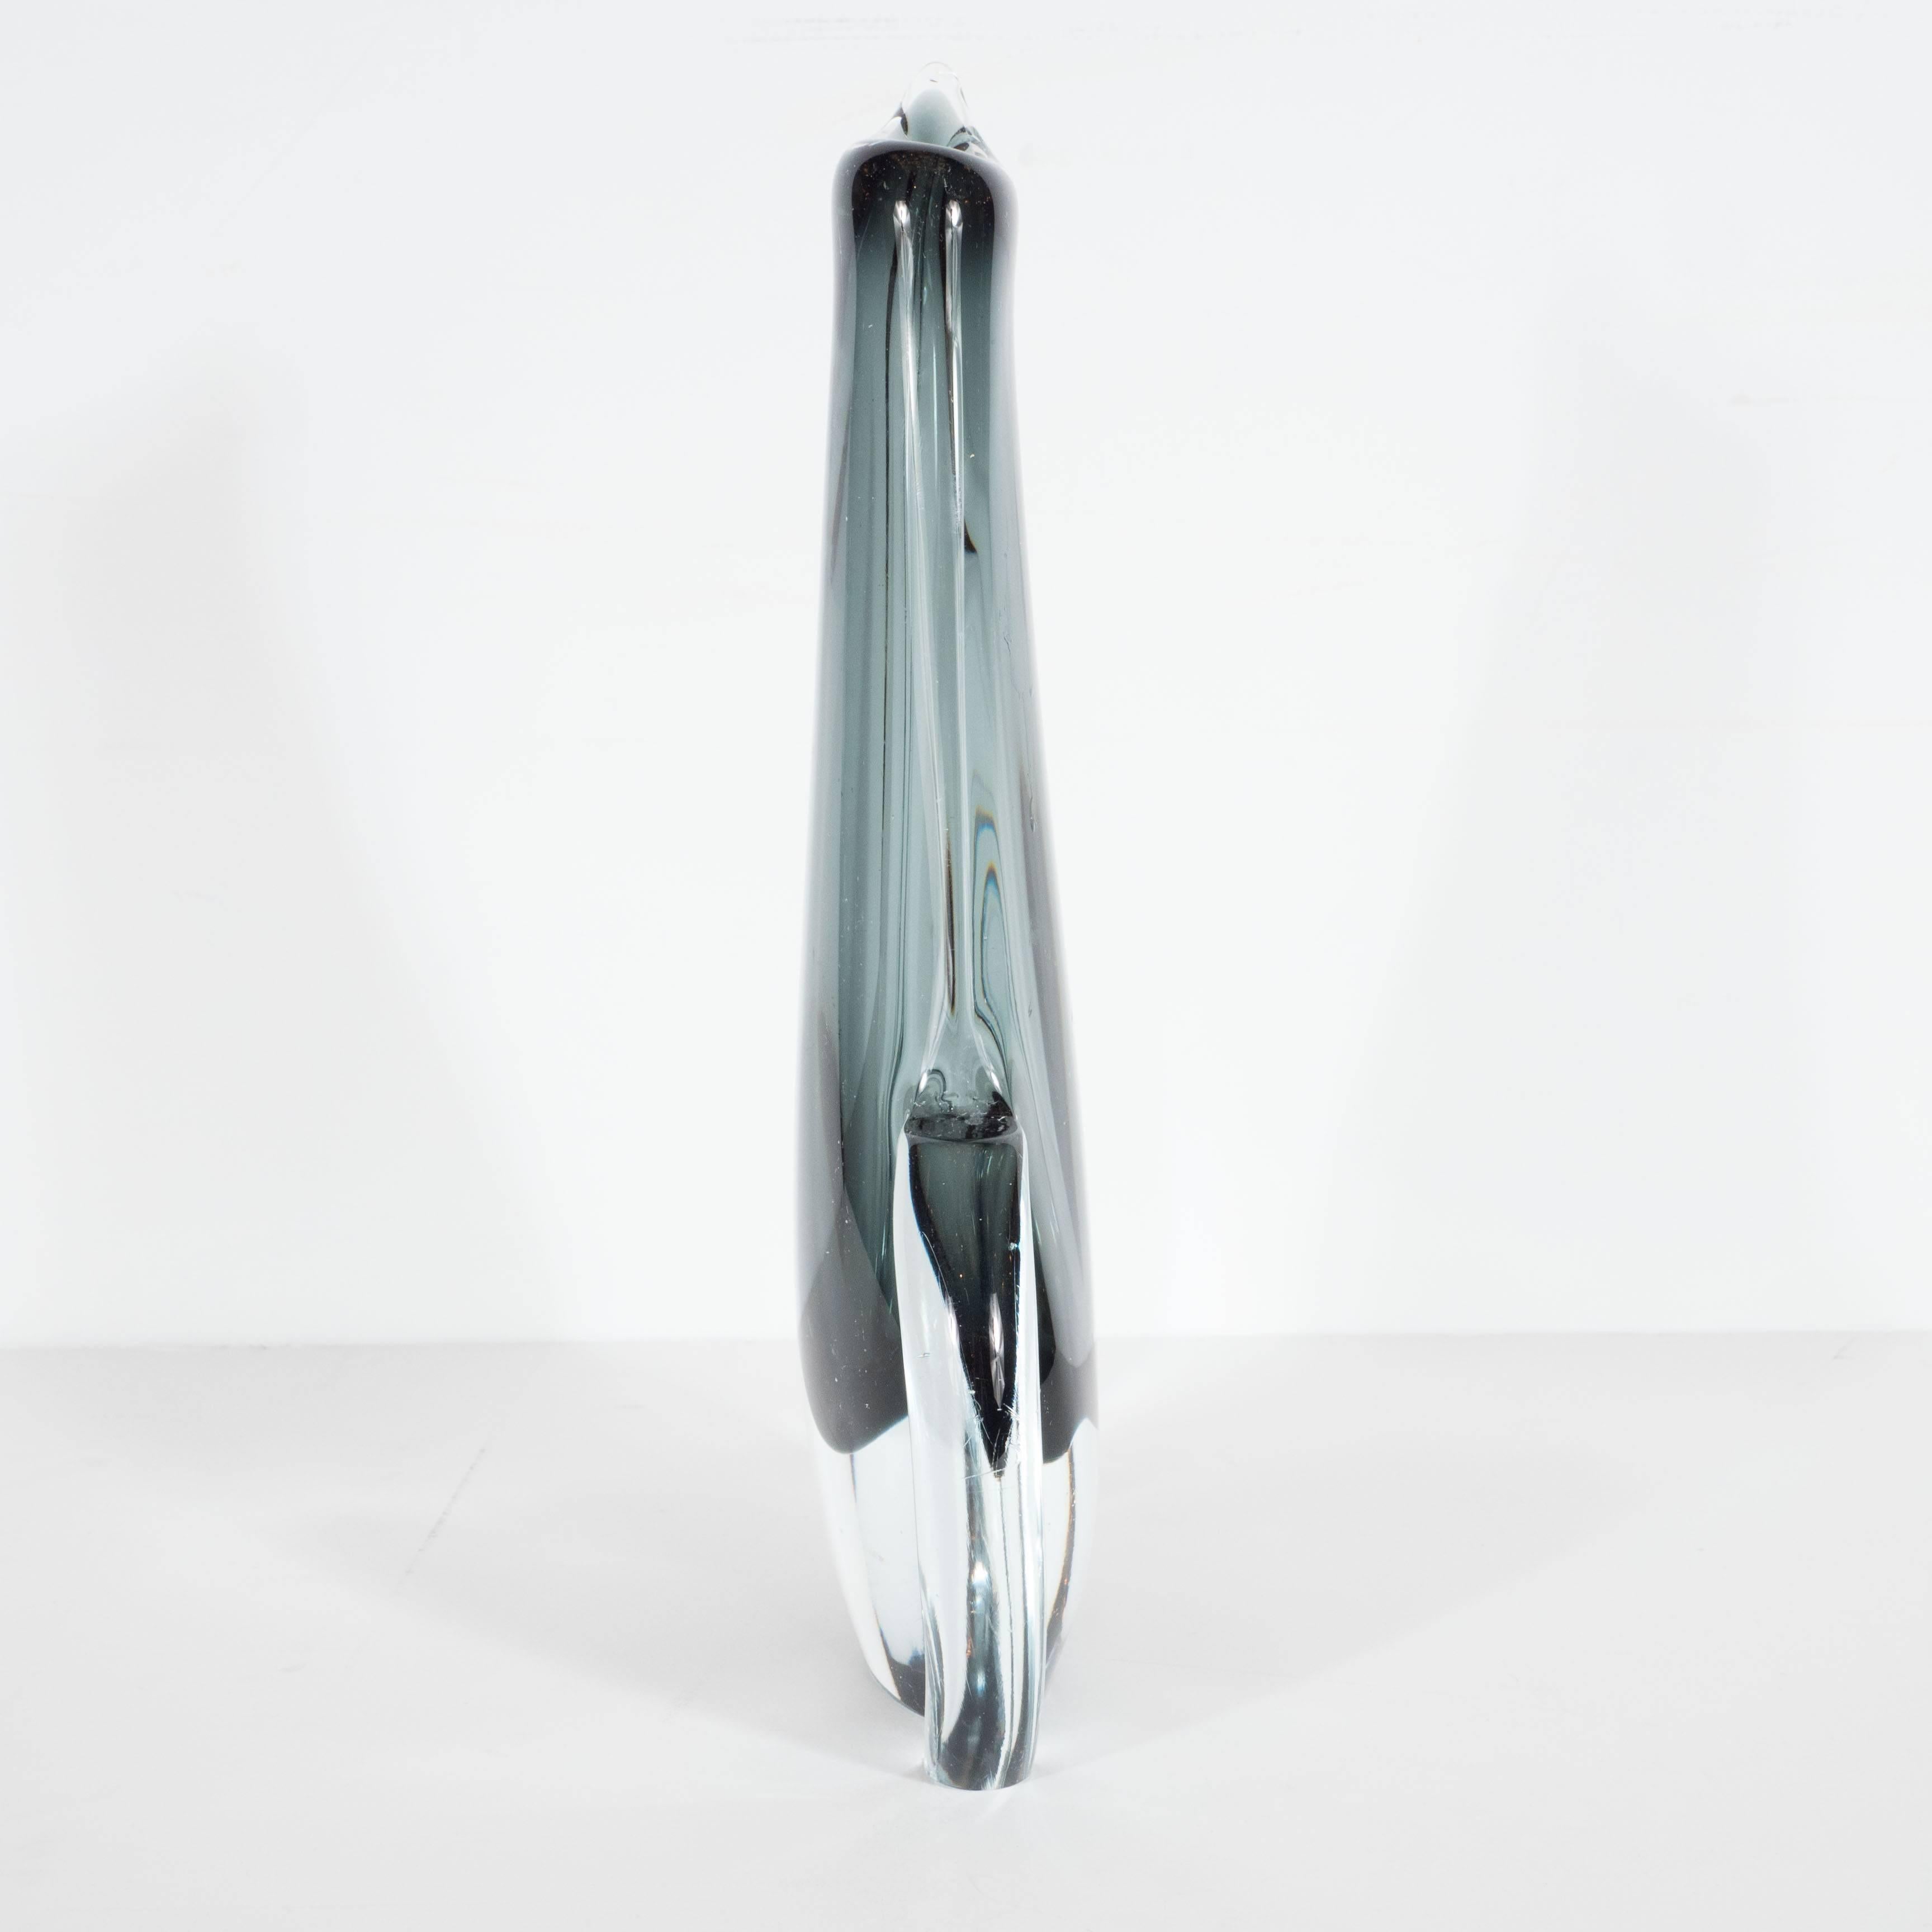 Mid-Century Modern organic teardrop vase by Sommerso Murano, Italy, circa 1960, this striking Sommerso Murano glass vase in handblown glass in an organic shape of a teardrop in grey blue and clear glass.
Italy, circa 1960
Measures: 12.75